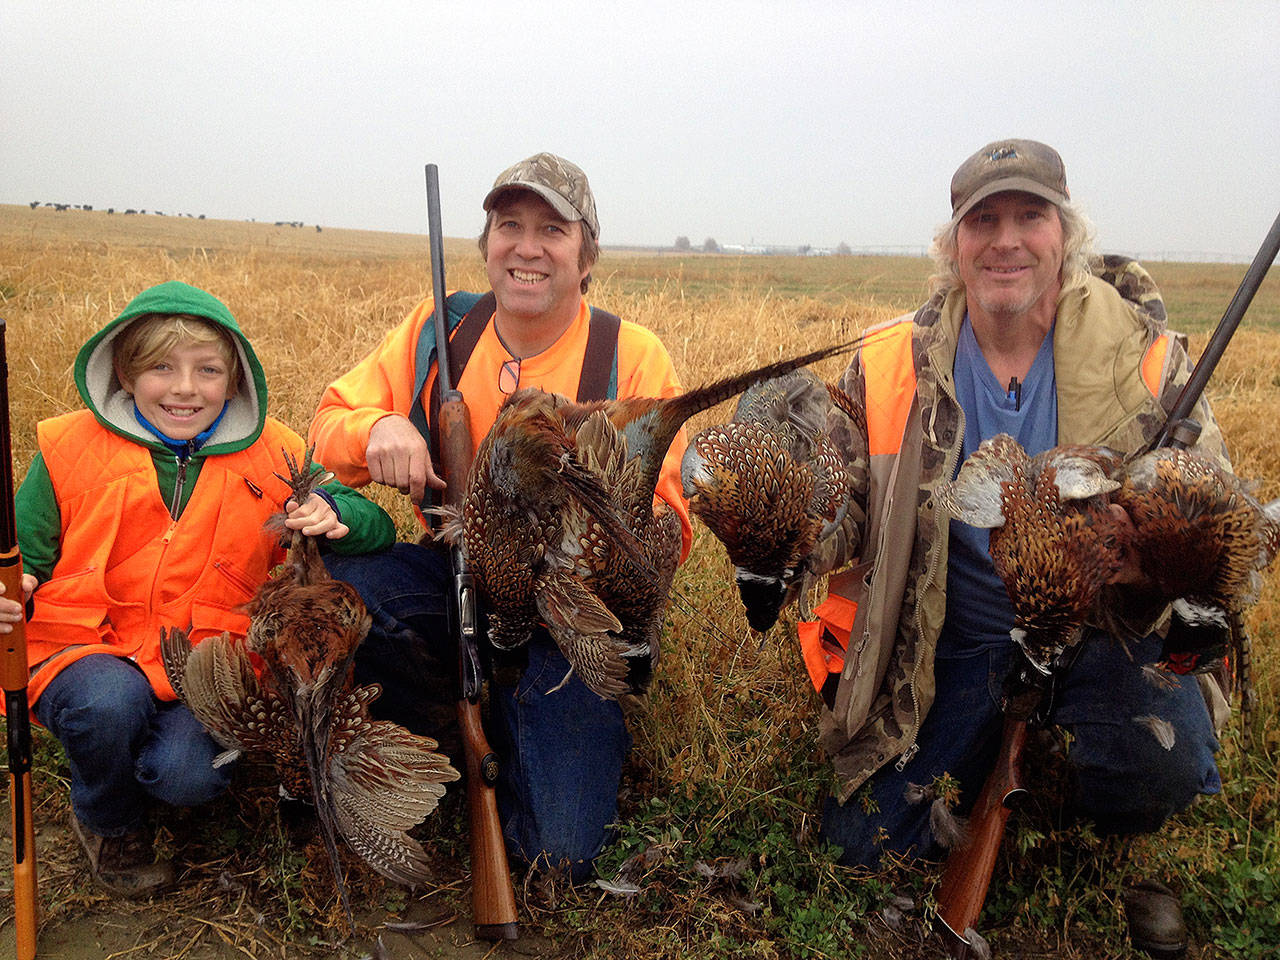 Arlin Anderson, Eric Anderson, and Jim Ritter hold up some pheasants they hunted; the birds will be served at the Wild Game Feed. Contributed photo